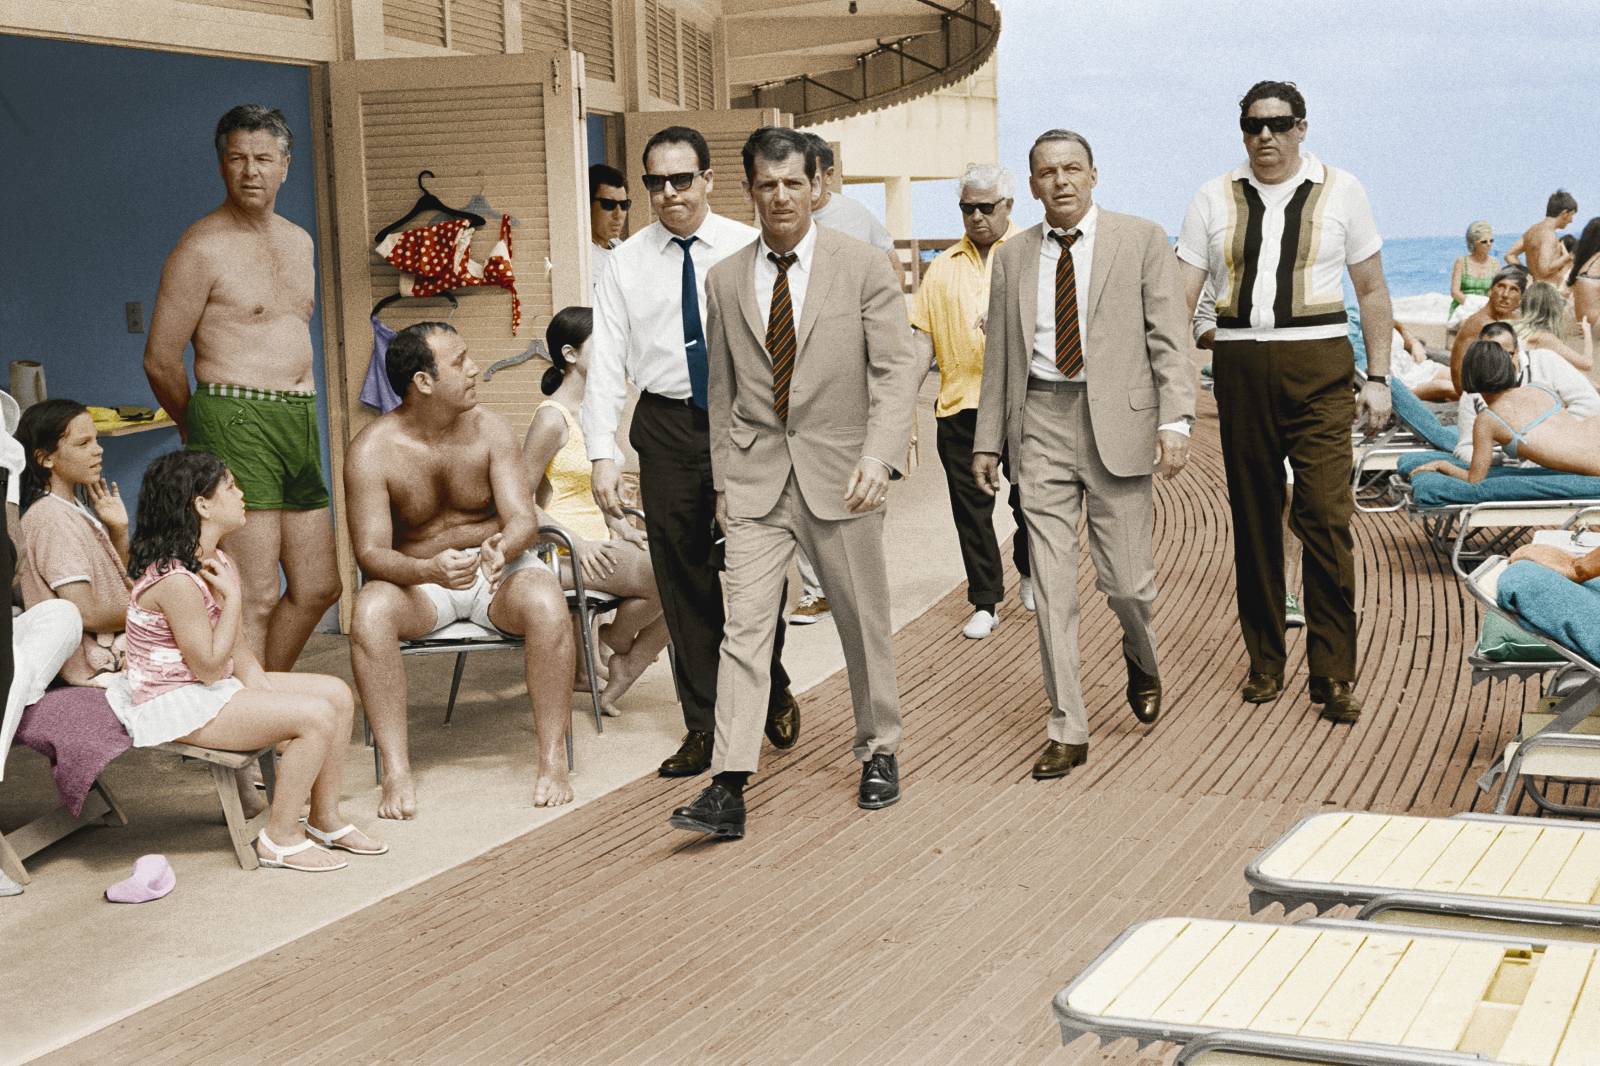 ‘Frank Sinatra with his minders and stand-in arriving at Miami Beach while filming The Lady in Cement’, 1968 (©Terry ONeill/Iconic Images)